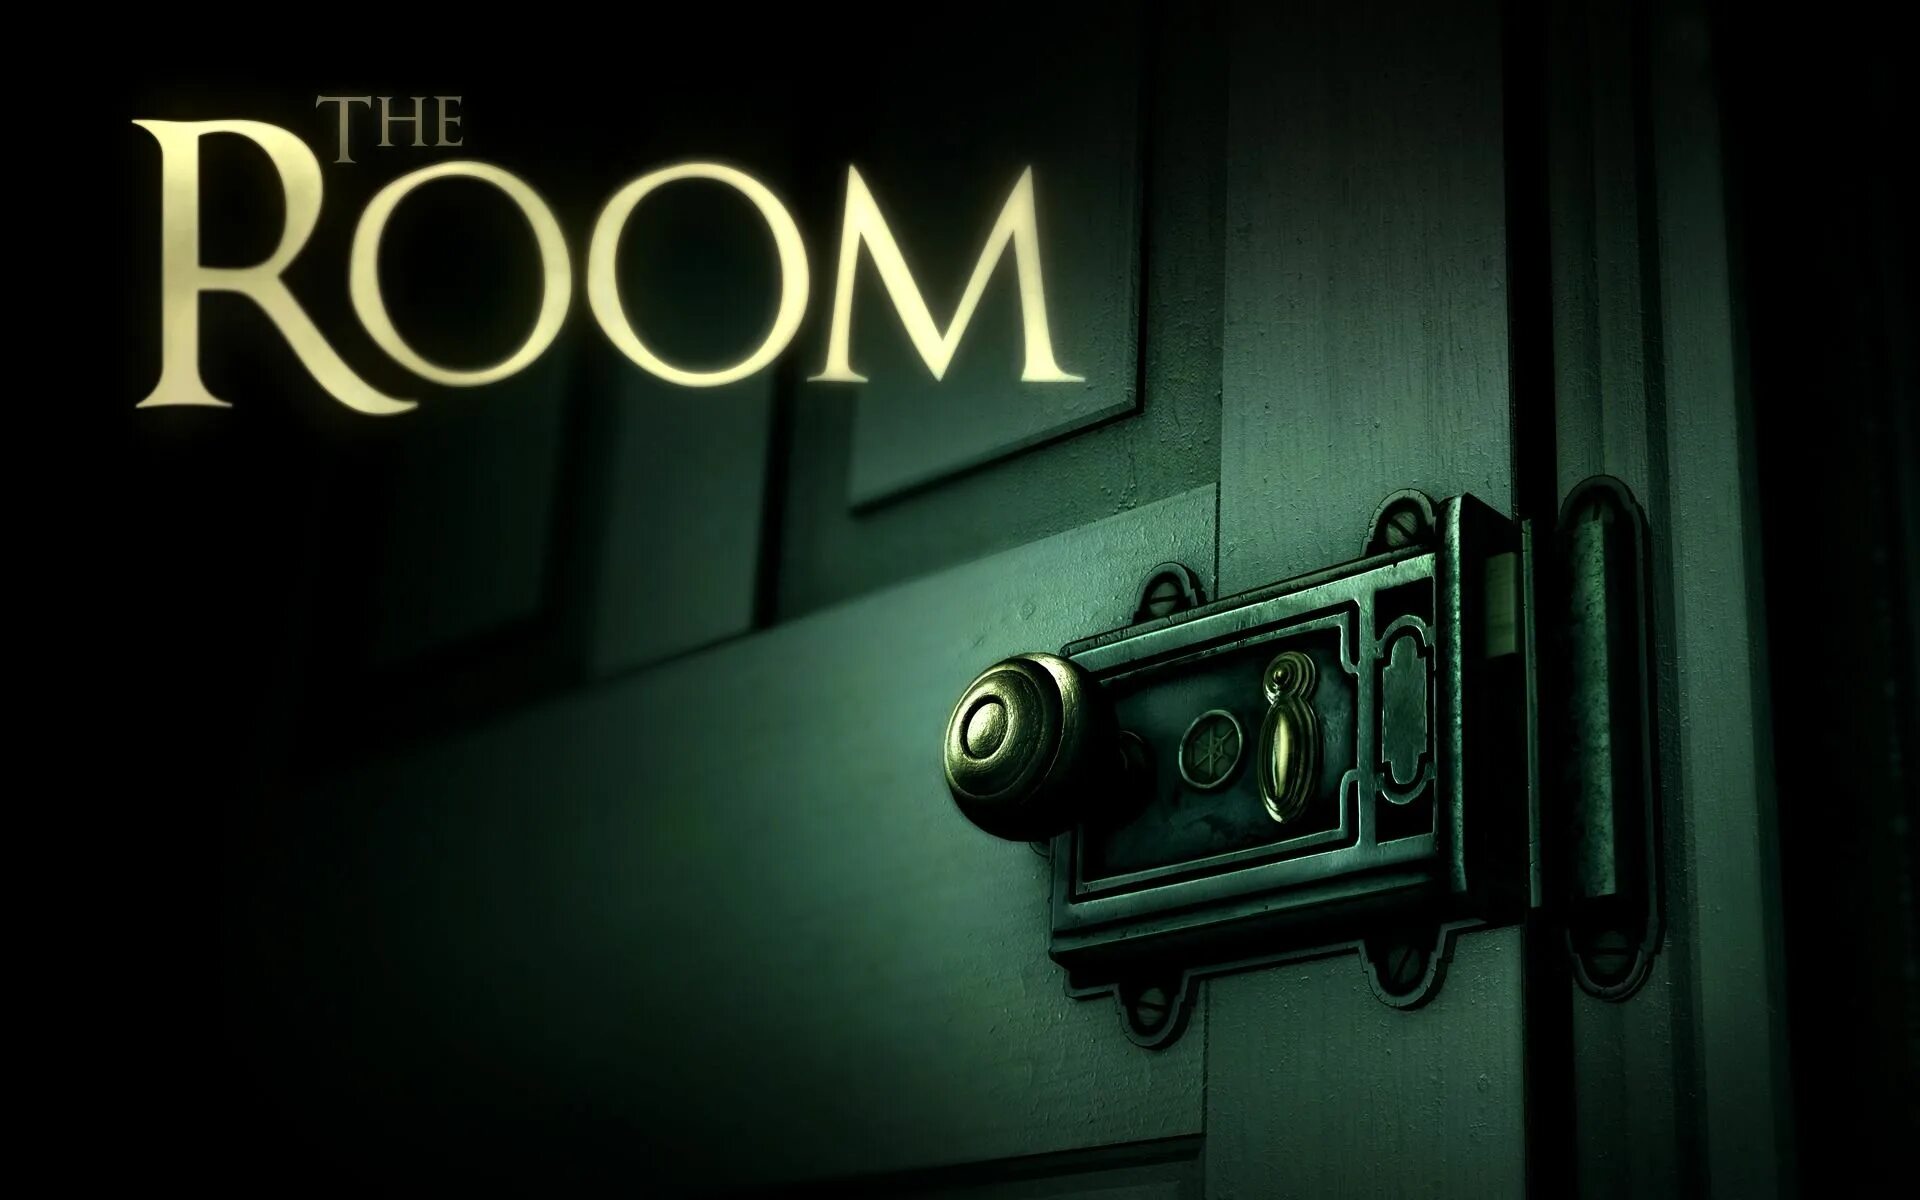 The rooms not use very often. The Room (игра). Room головоломка. Комната для игр. Румс игра.